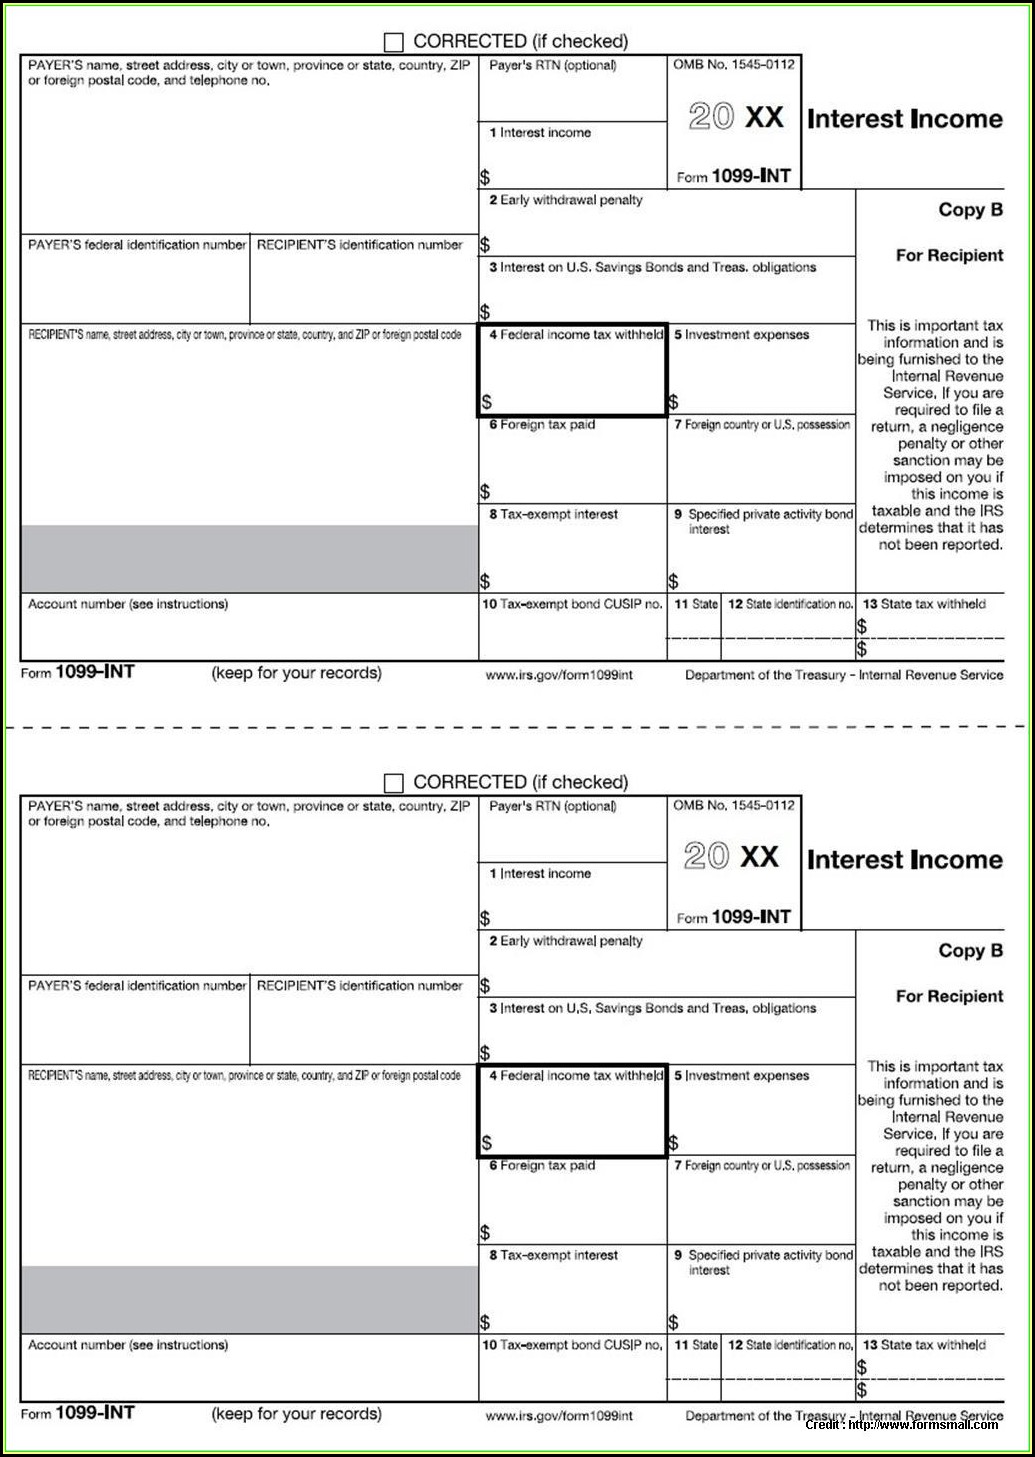 1099 Misc Form 2014 Fillable Free